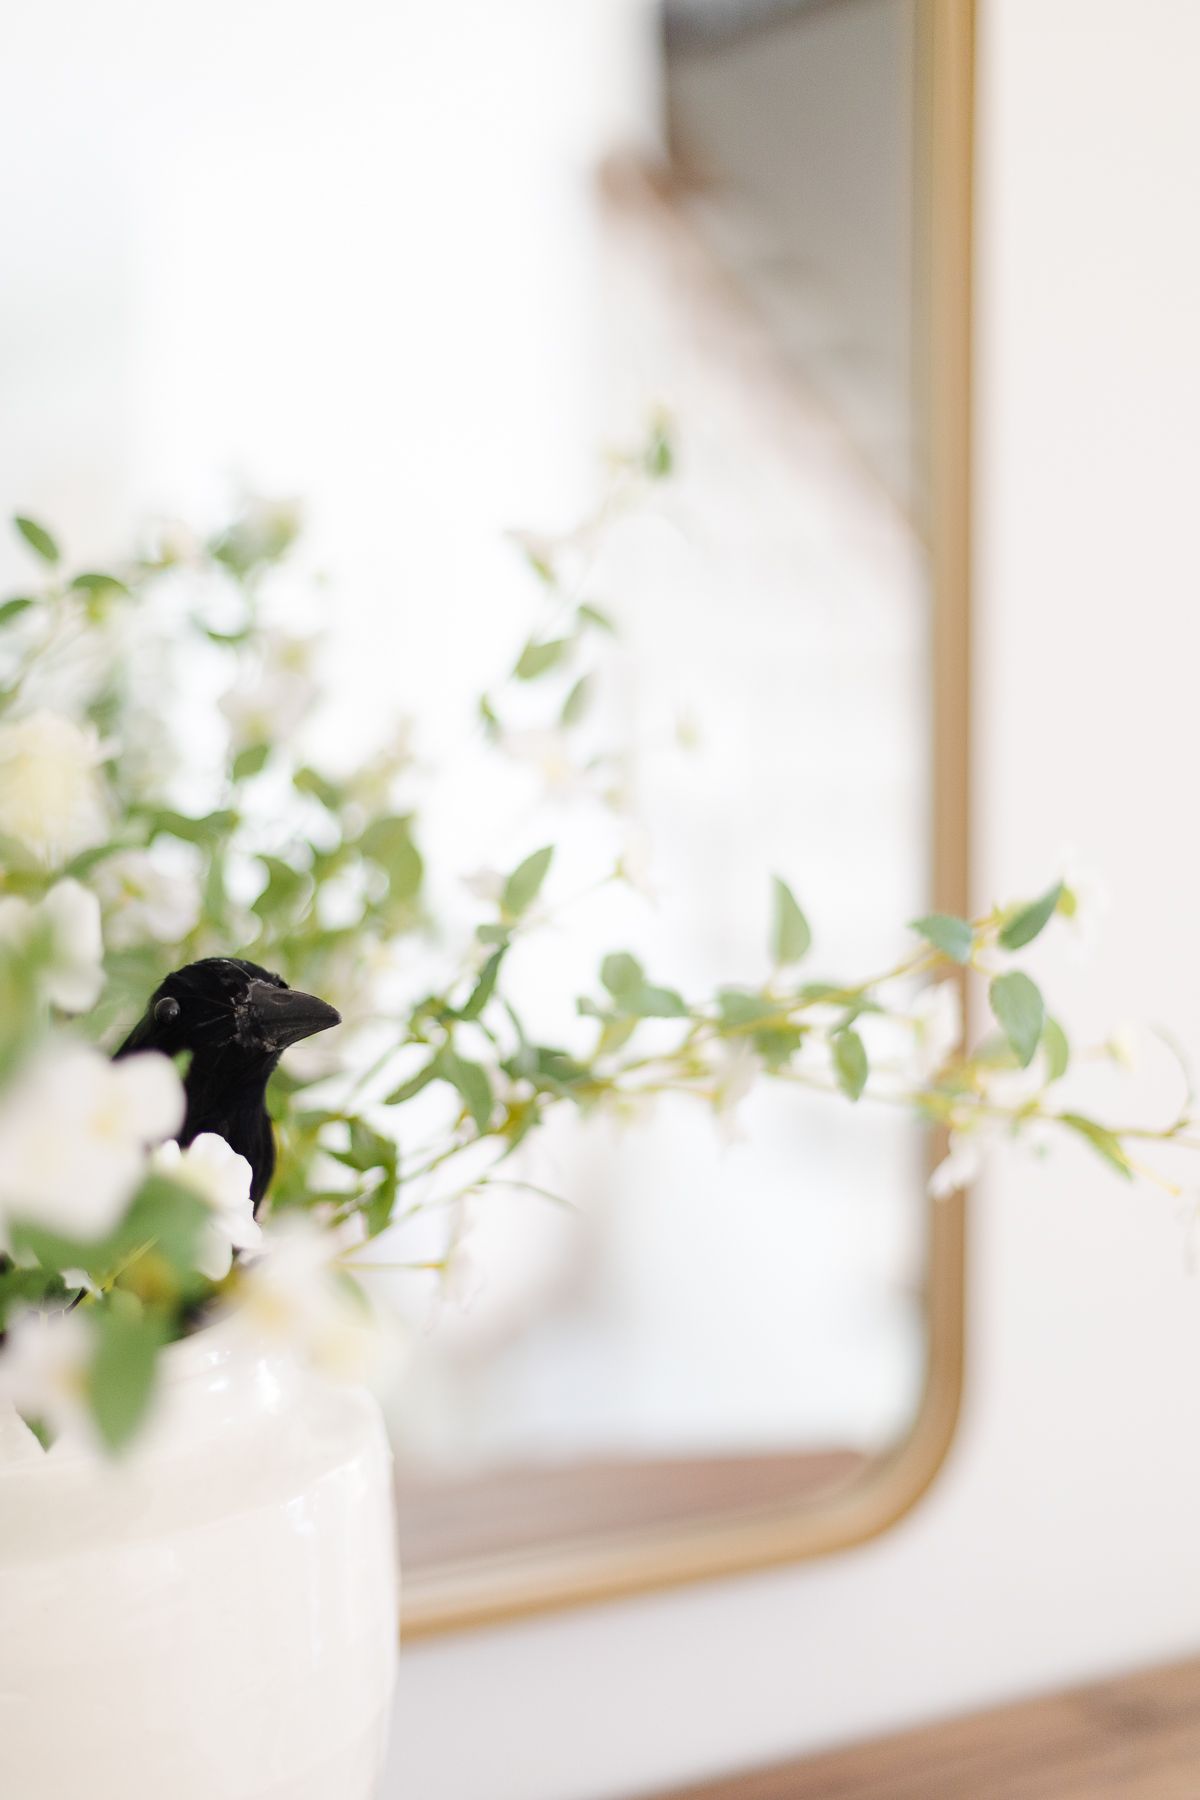 A black crow hiding in a white vase of flowers for halloween decor